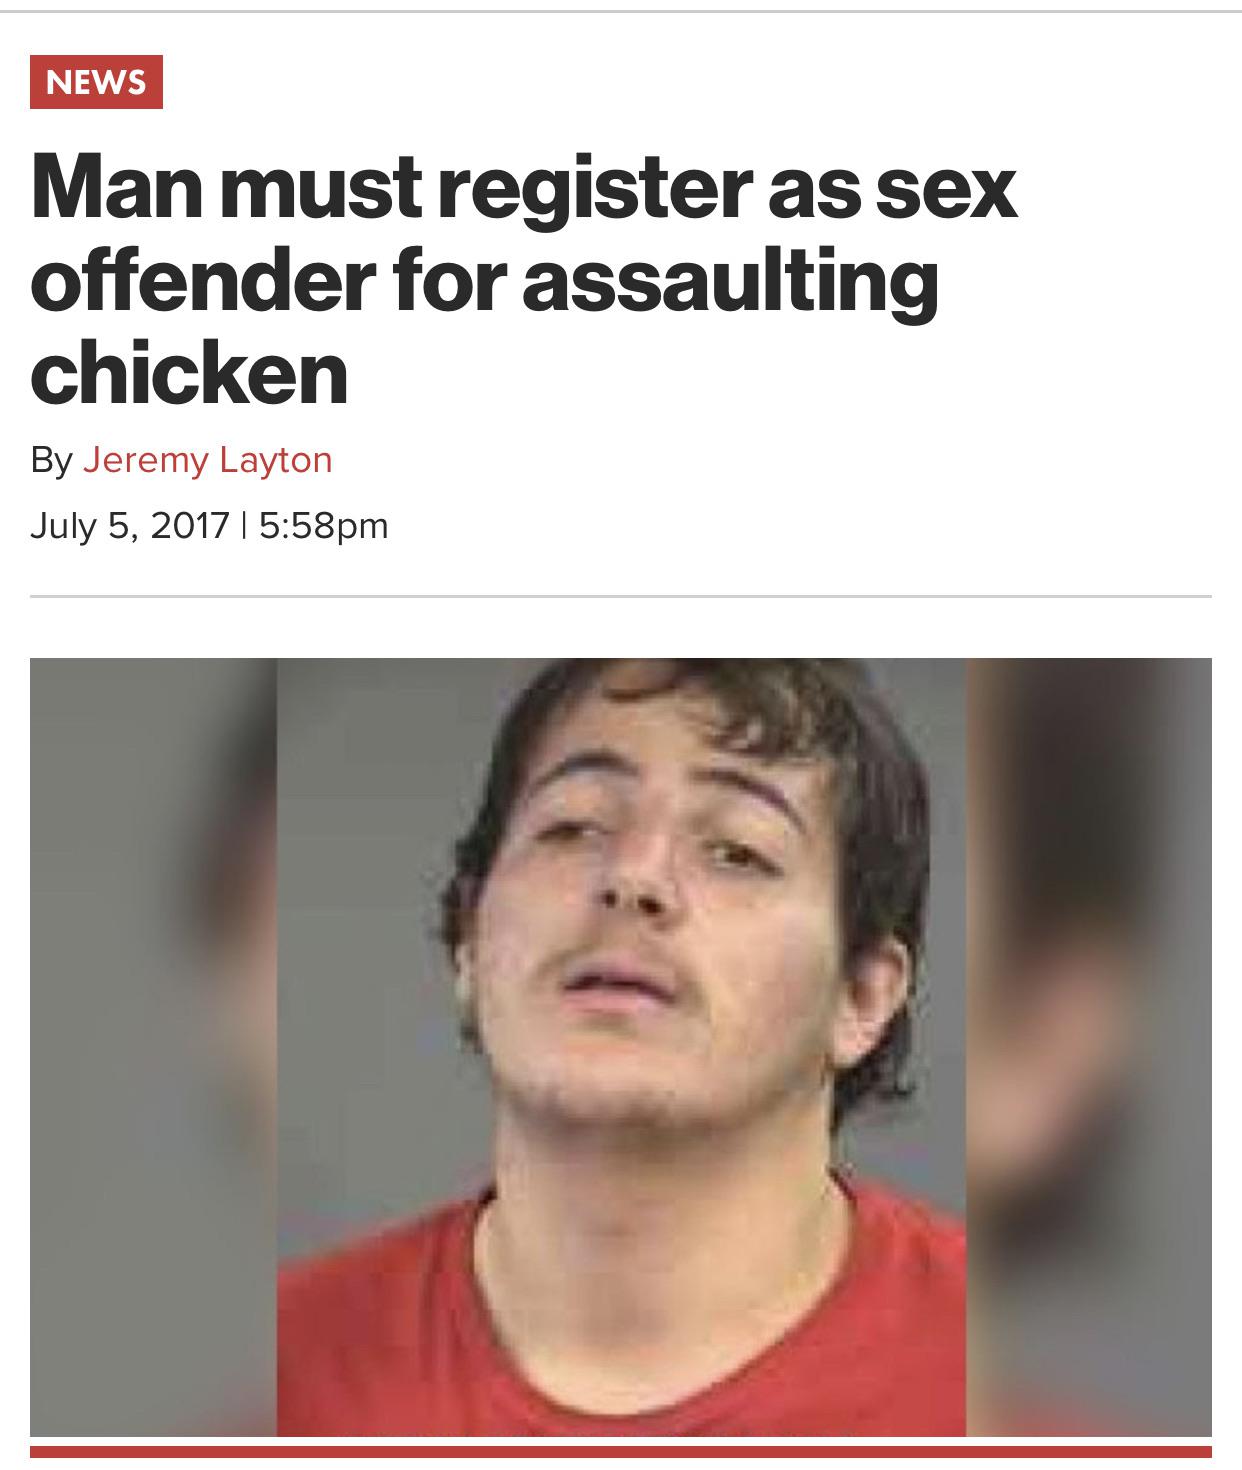 photo caption - News Man must register as sex offender for assaulting chicken By Jeremy Layton | pm